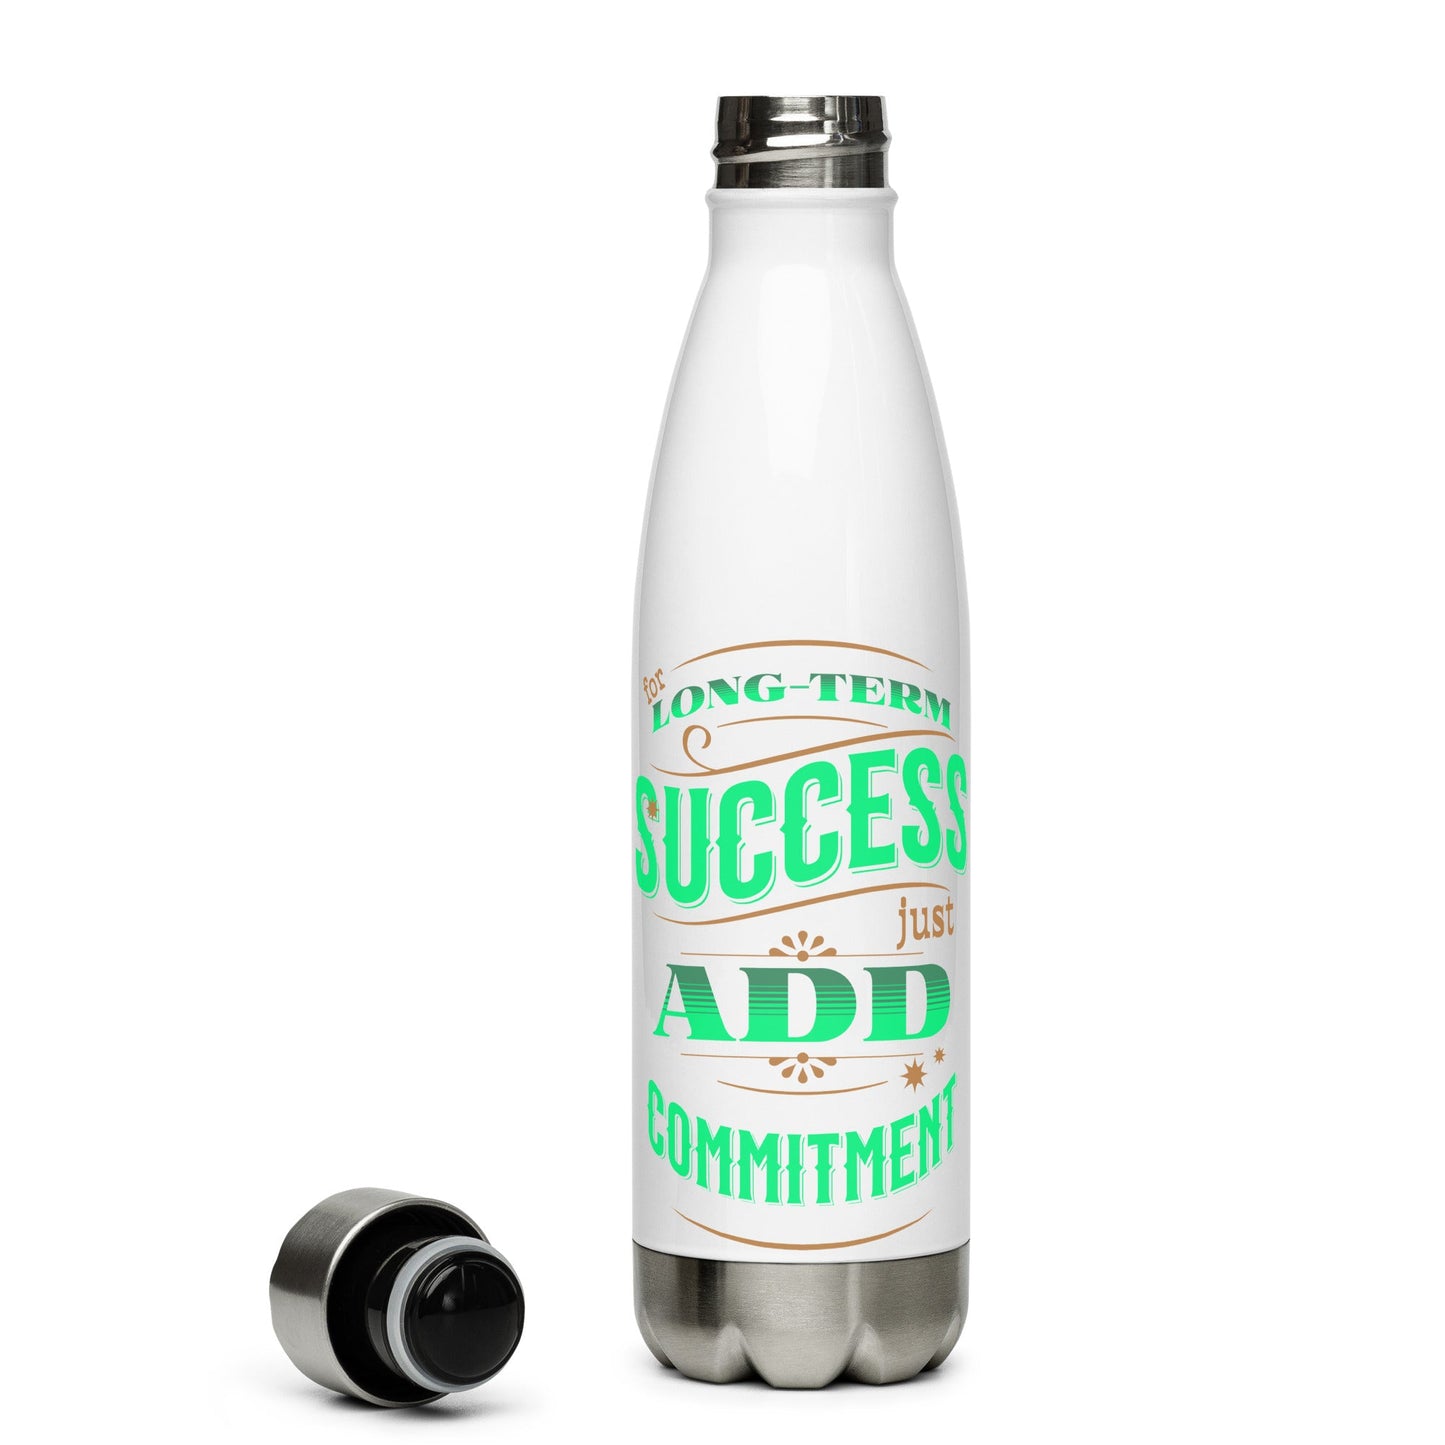 The Motivator Stainless Stainless Steel Water Bottle (Add Commitment) - Motivational Wonders